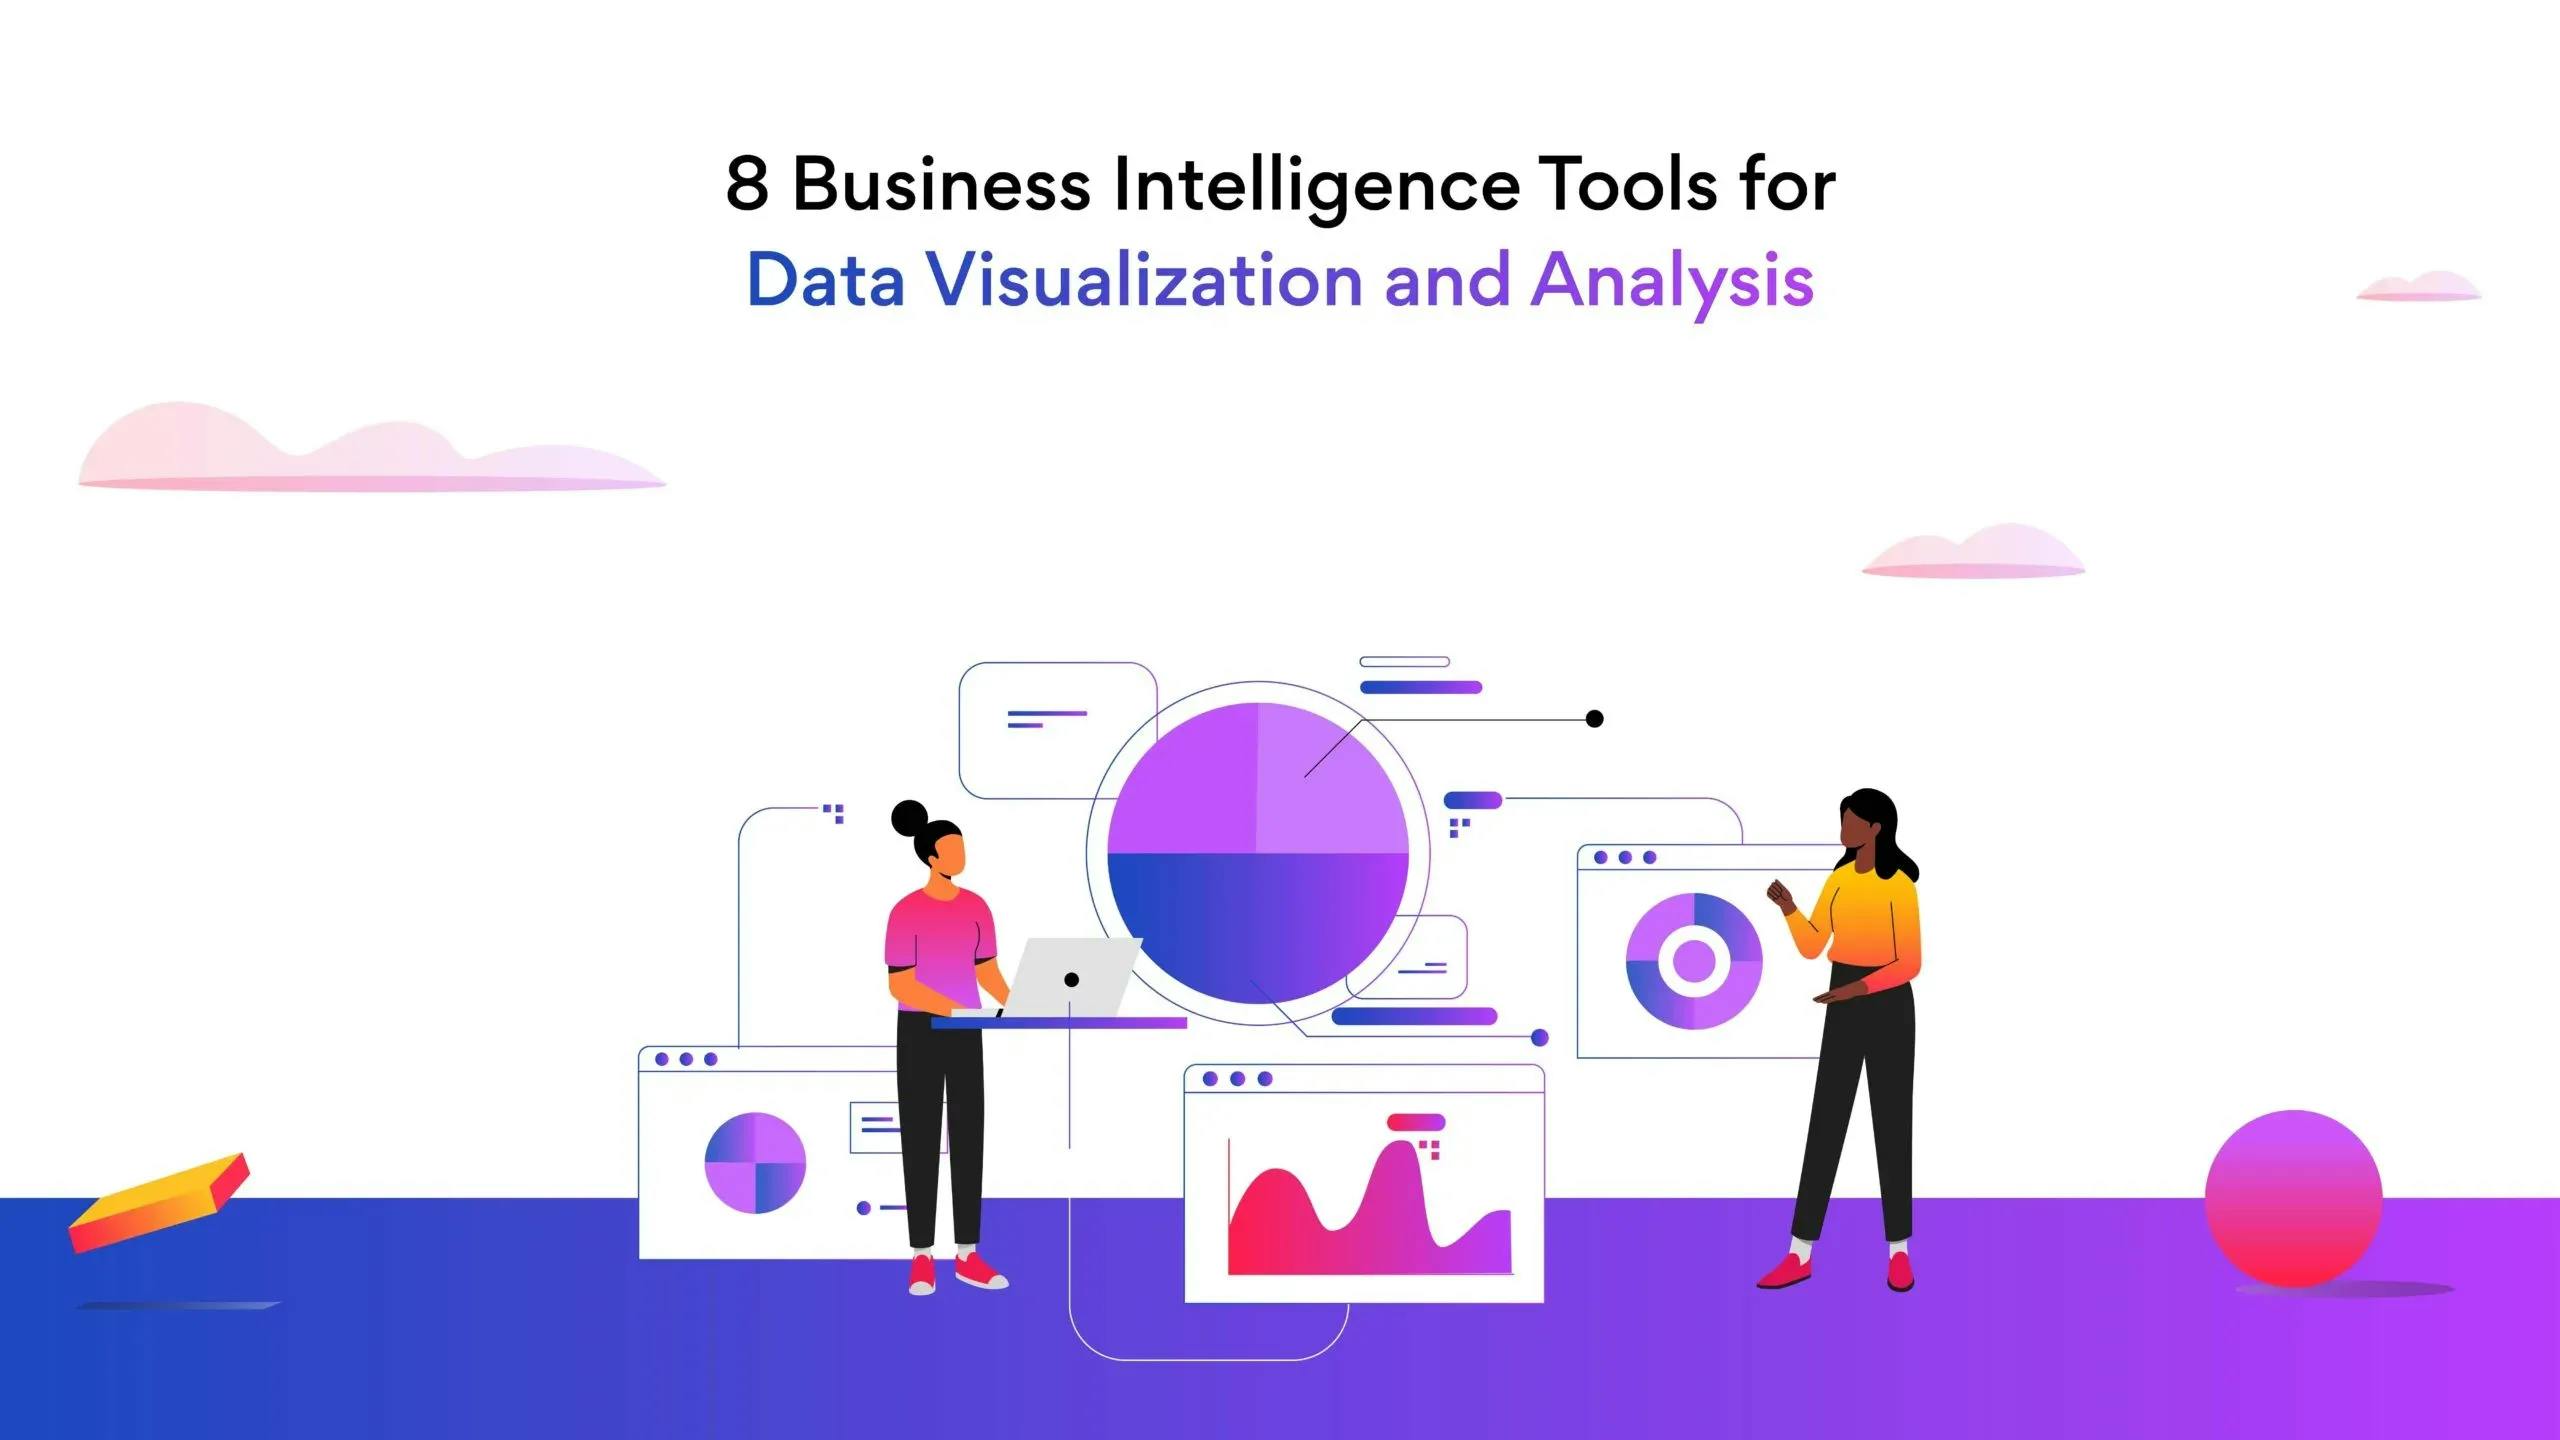 8 Business Intelligence Tools for Data Visualization and Analysis